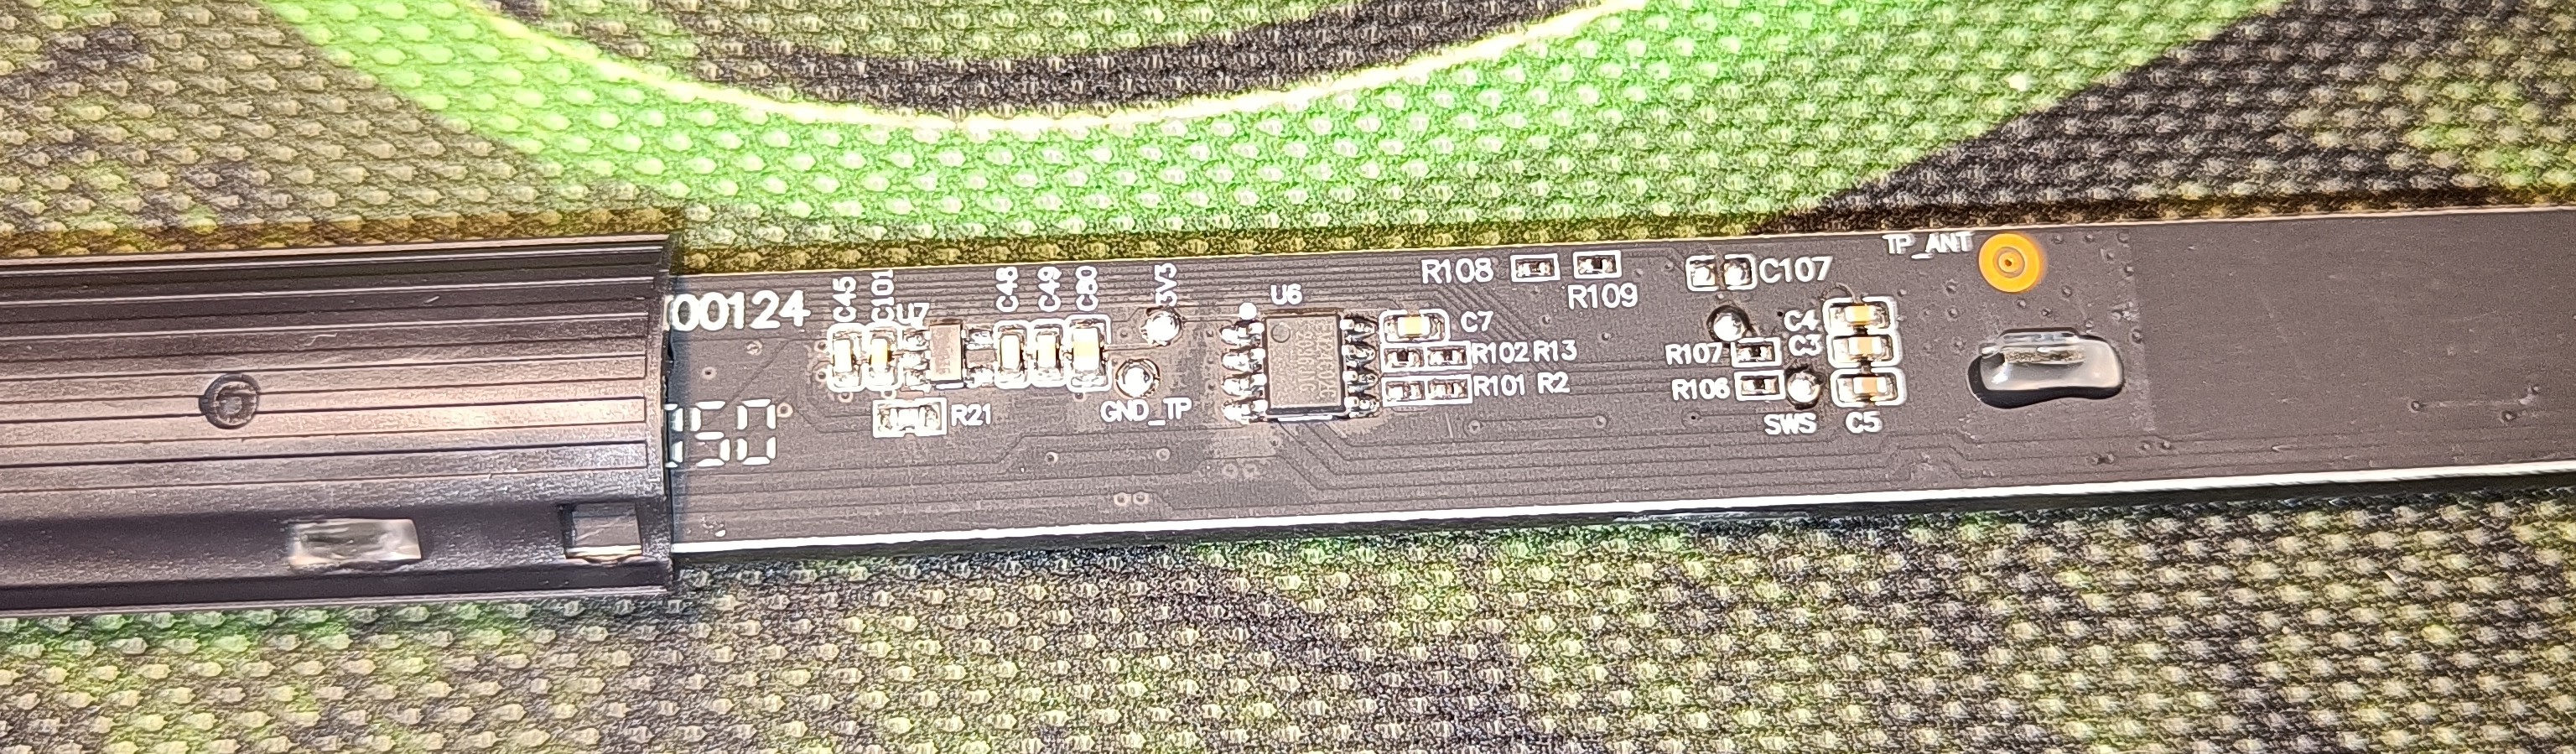 Picture showing closeup of SOIC-8 package on the PCB.